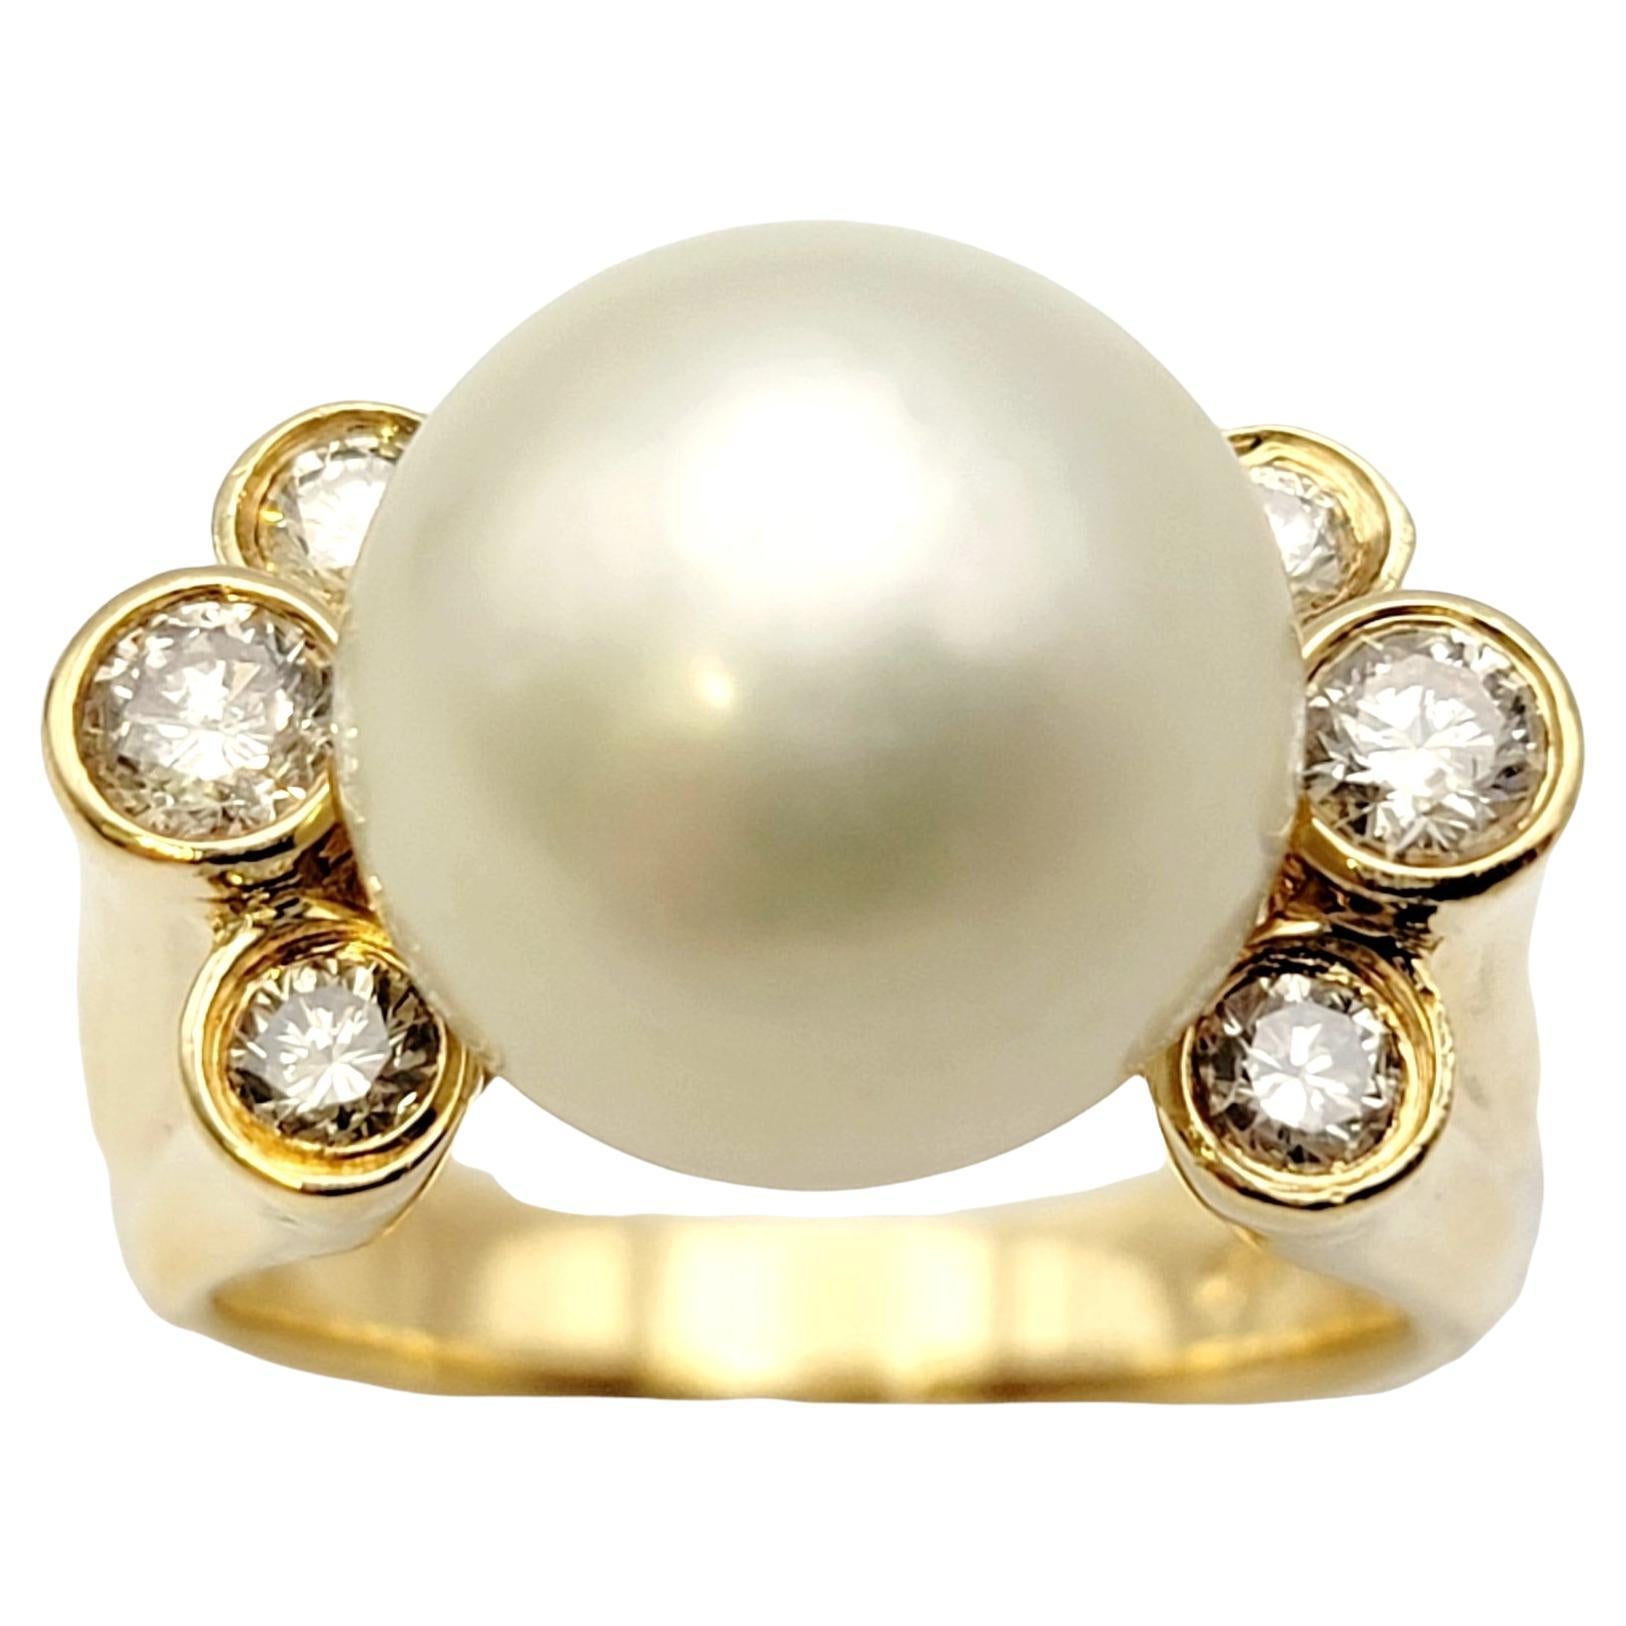 South Sea 12mm Cultured Pearl and Bezel Set Diamond Ring in 18 Yellow Gold 